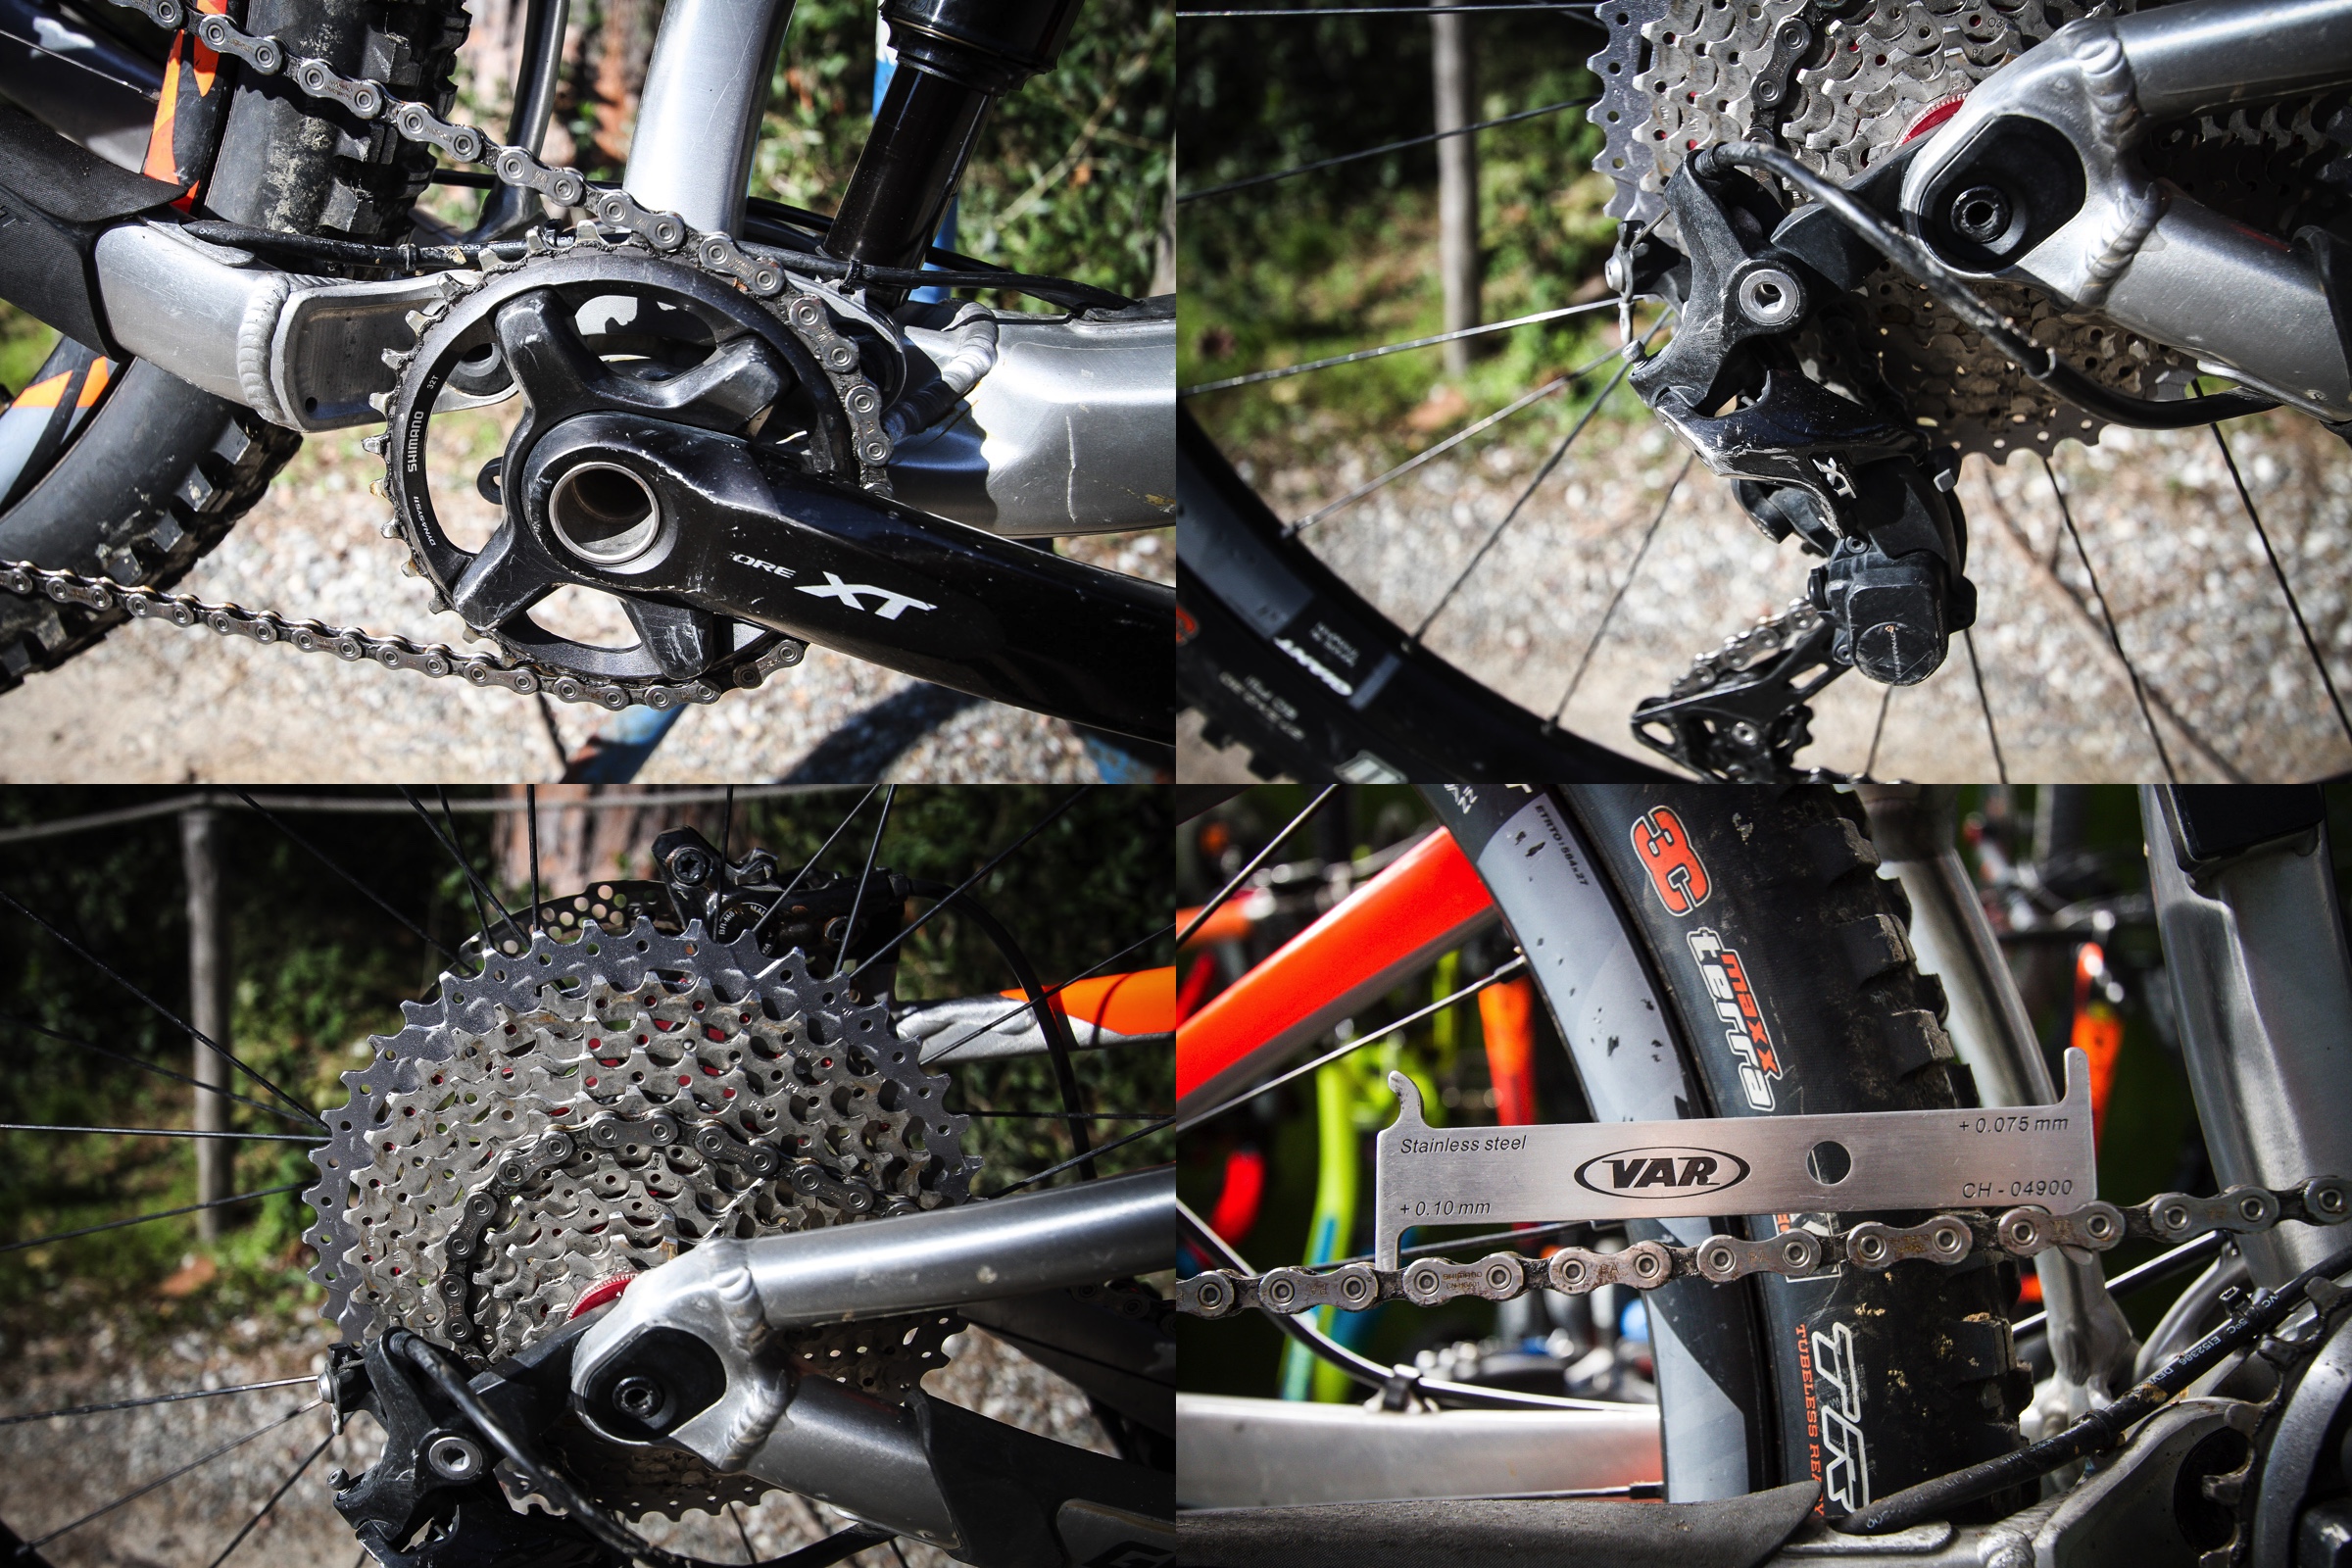 We take a close look at the chain and sprockets, all here are in good working order, our chain tool also shows us that the chain is still in optimum condition.